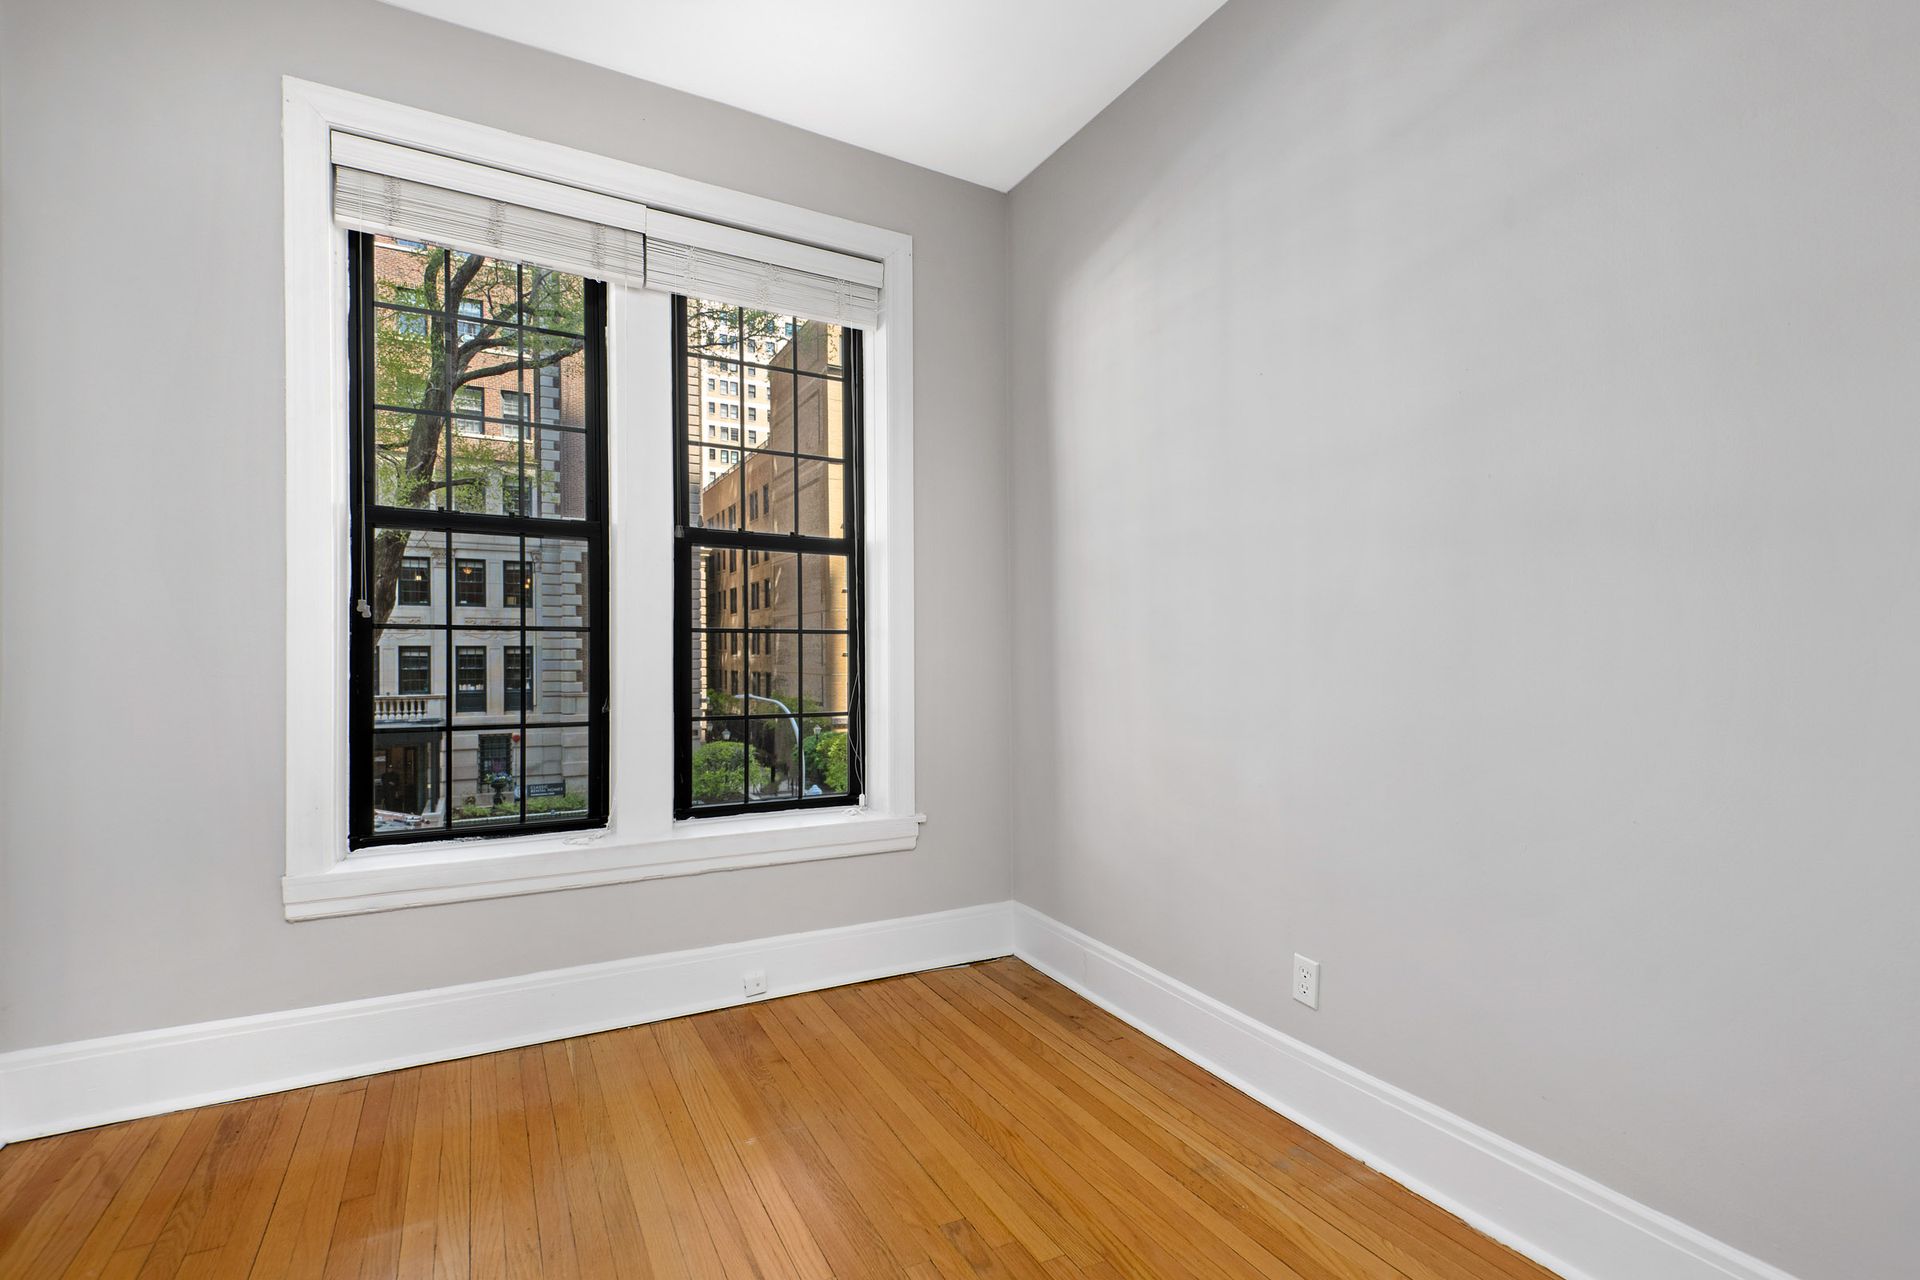 An empty room with two windows and hardwood floors.